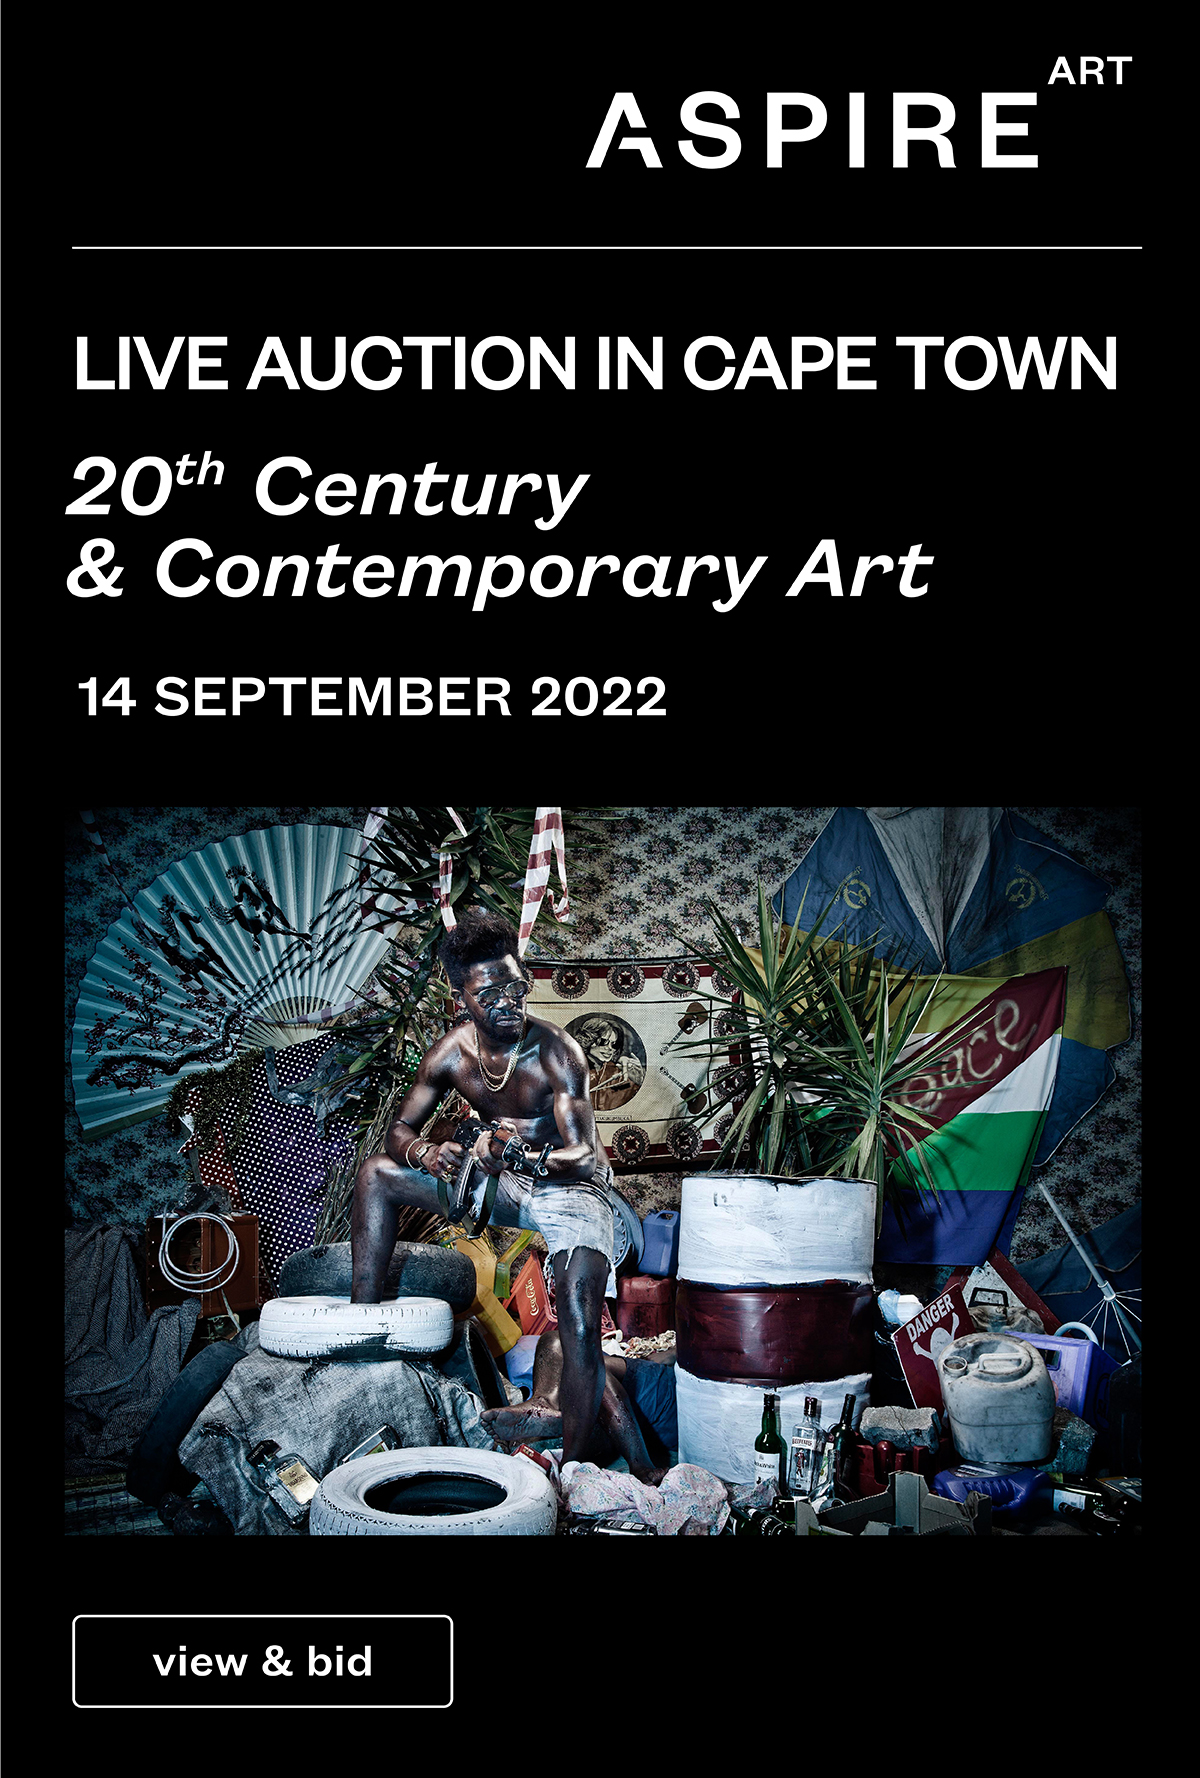 Aspire Art Live Auction in Cape Town